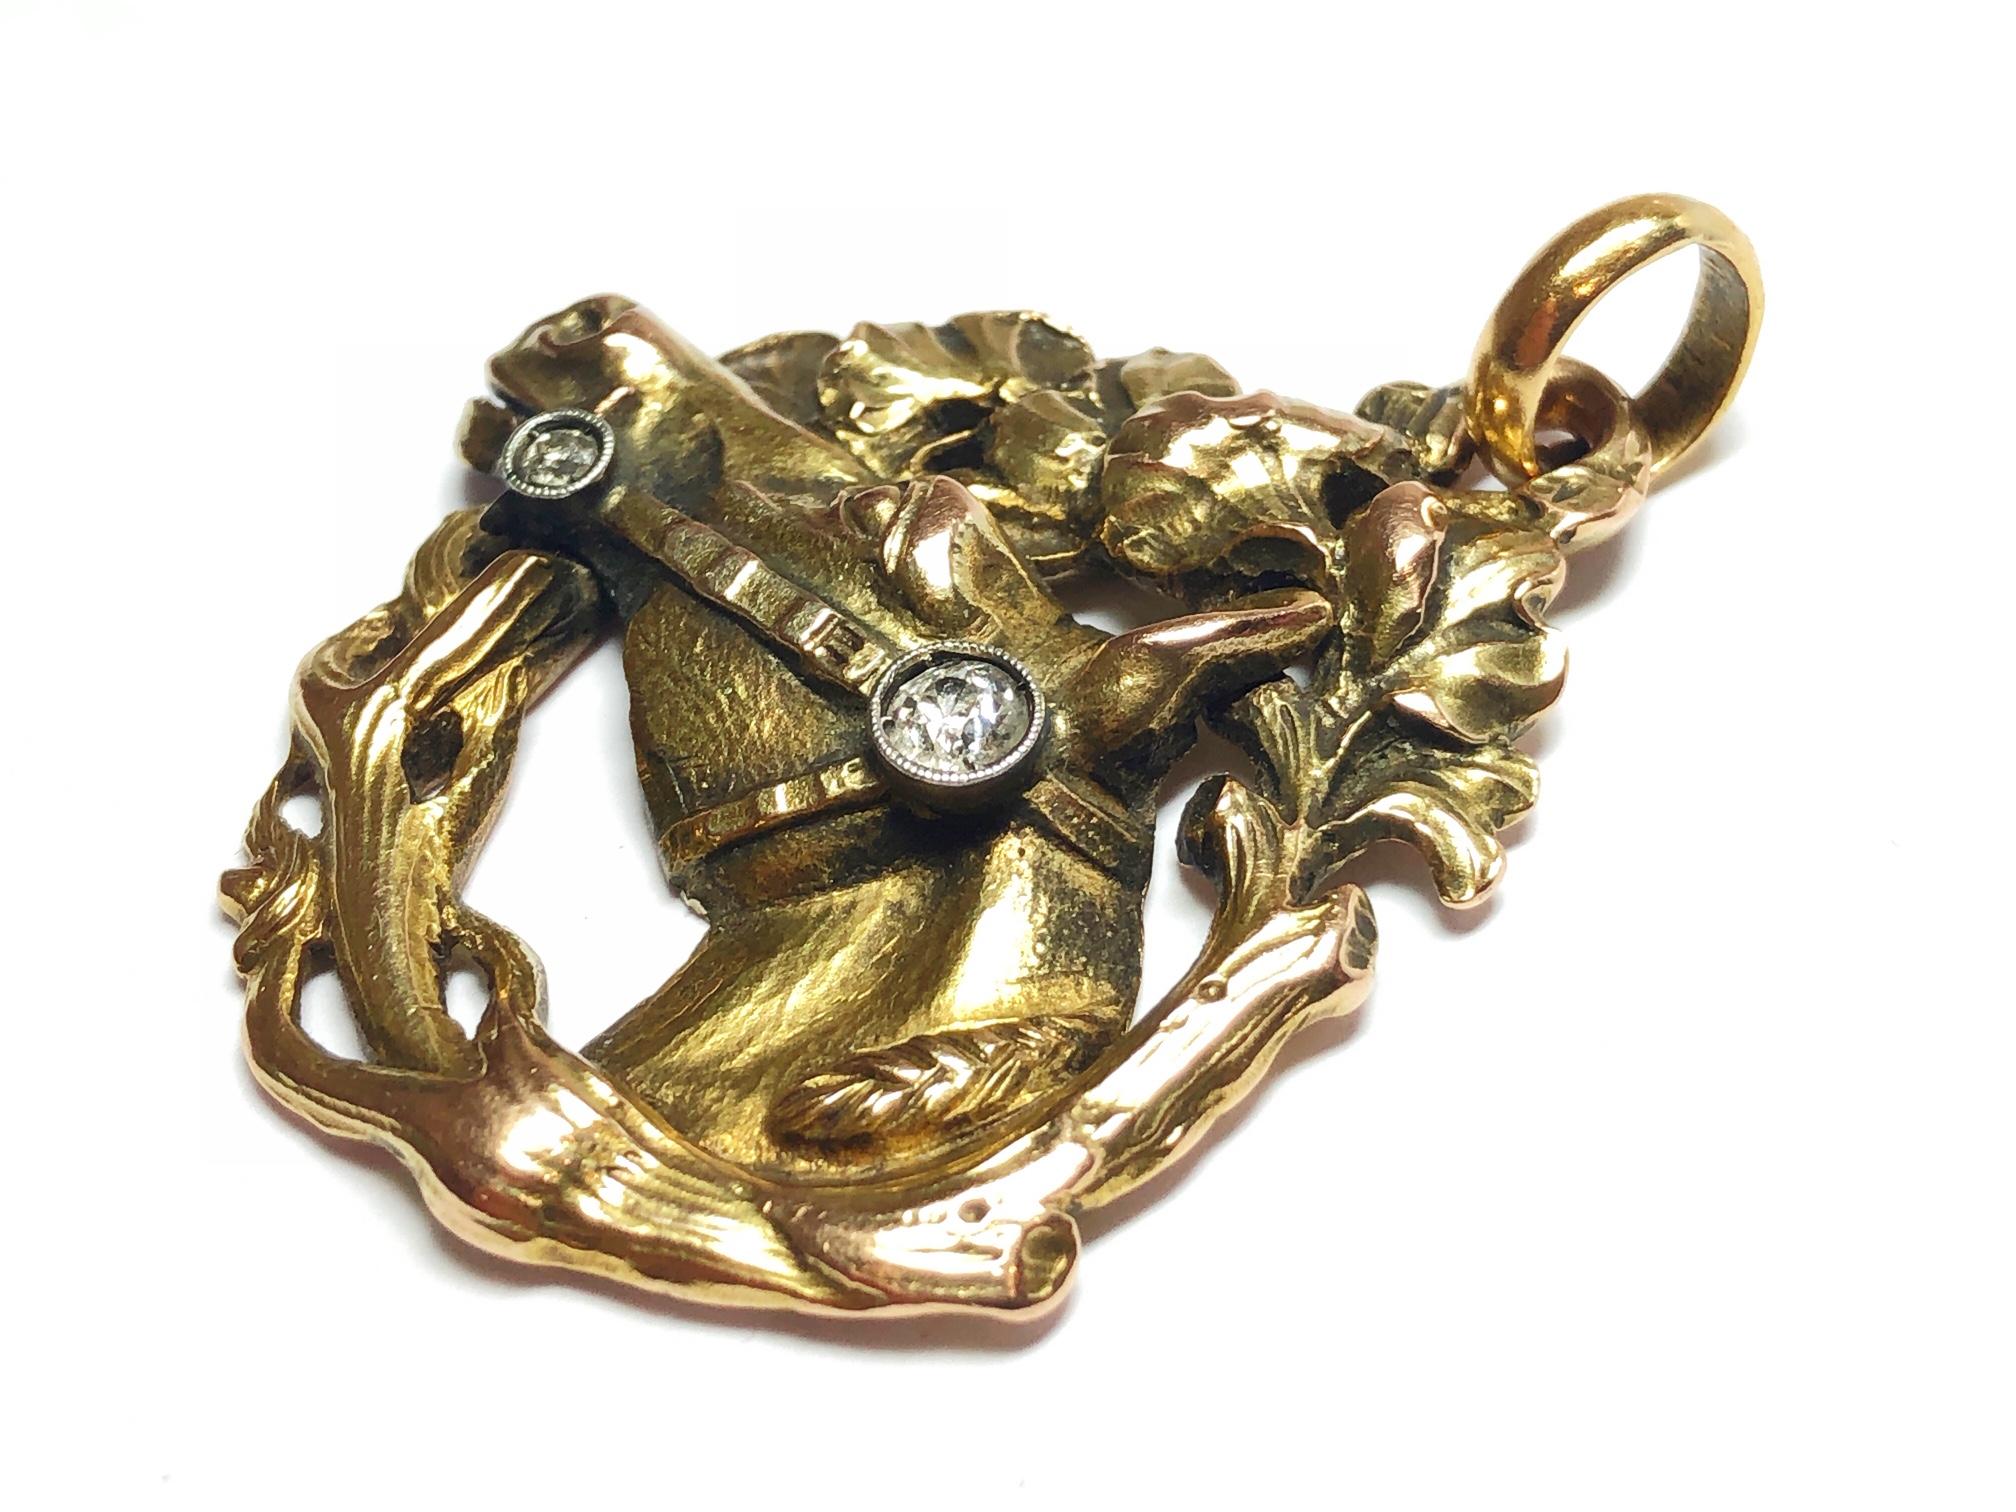 An antique horse pendant, with a horse's head, surrounded by a branch of a Ginkgo Biloba tree, mounted in yellow gold, with two old-cut diamonds set in the bridle, circa 1880.